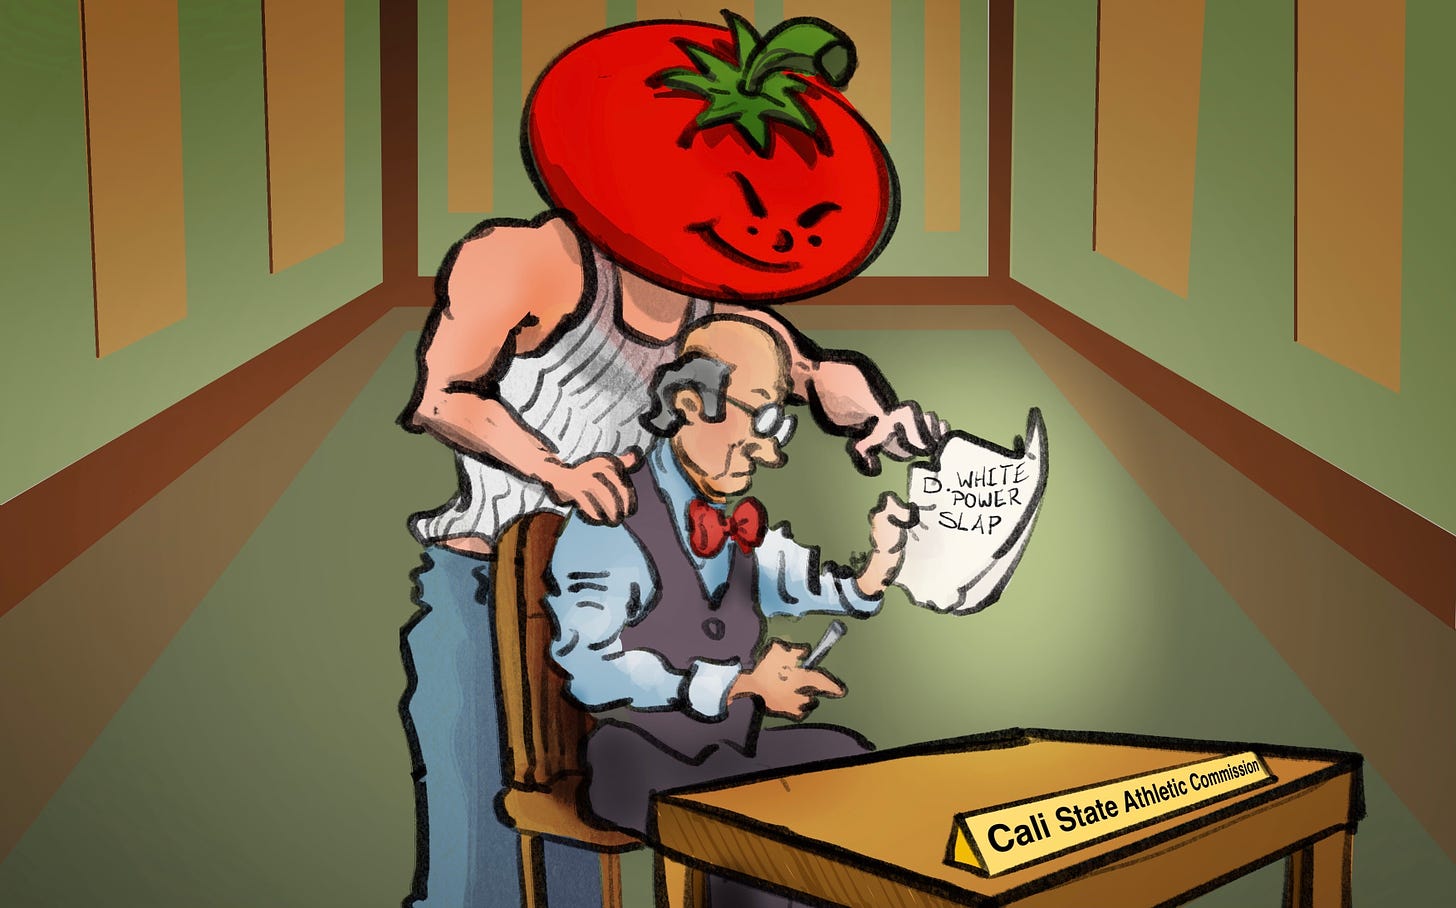 The tomato gets the CSAC to sign off on power slap by Chris Rini